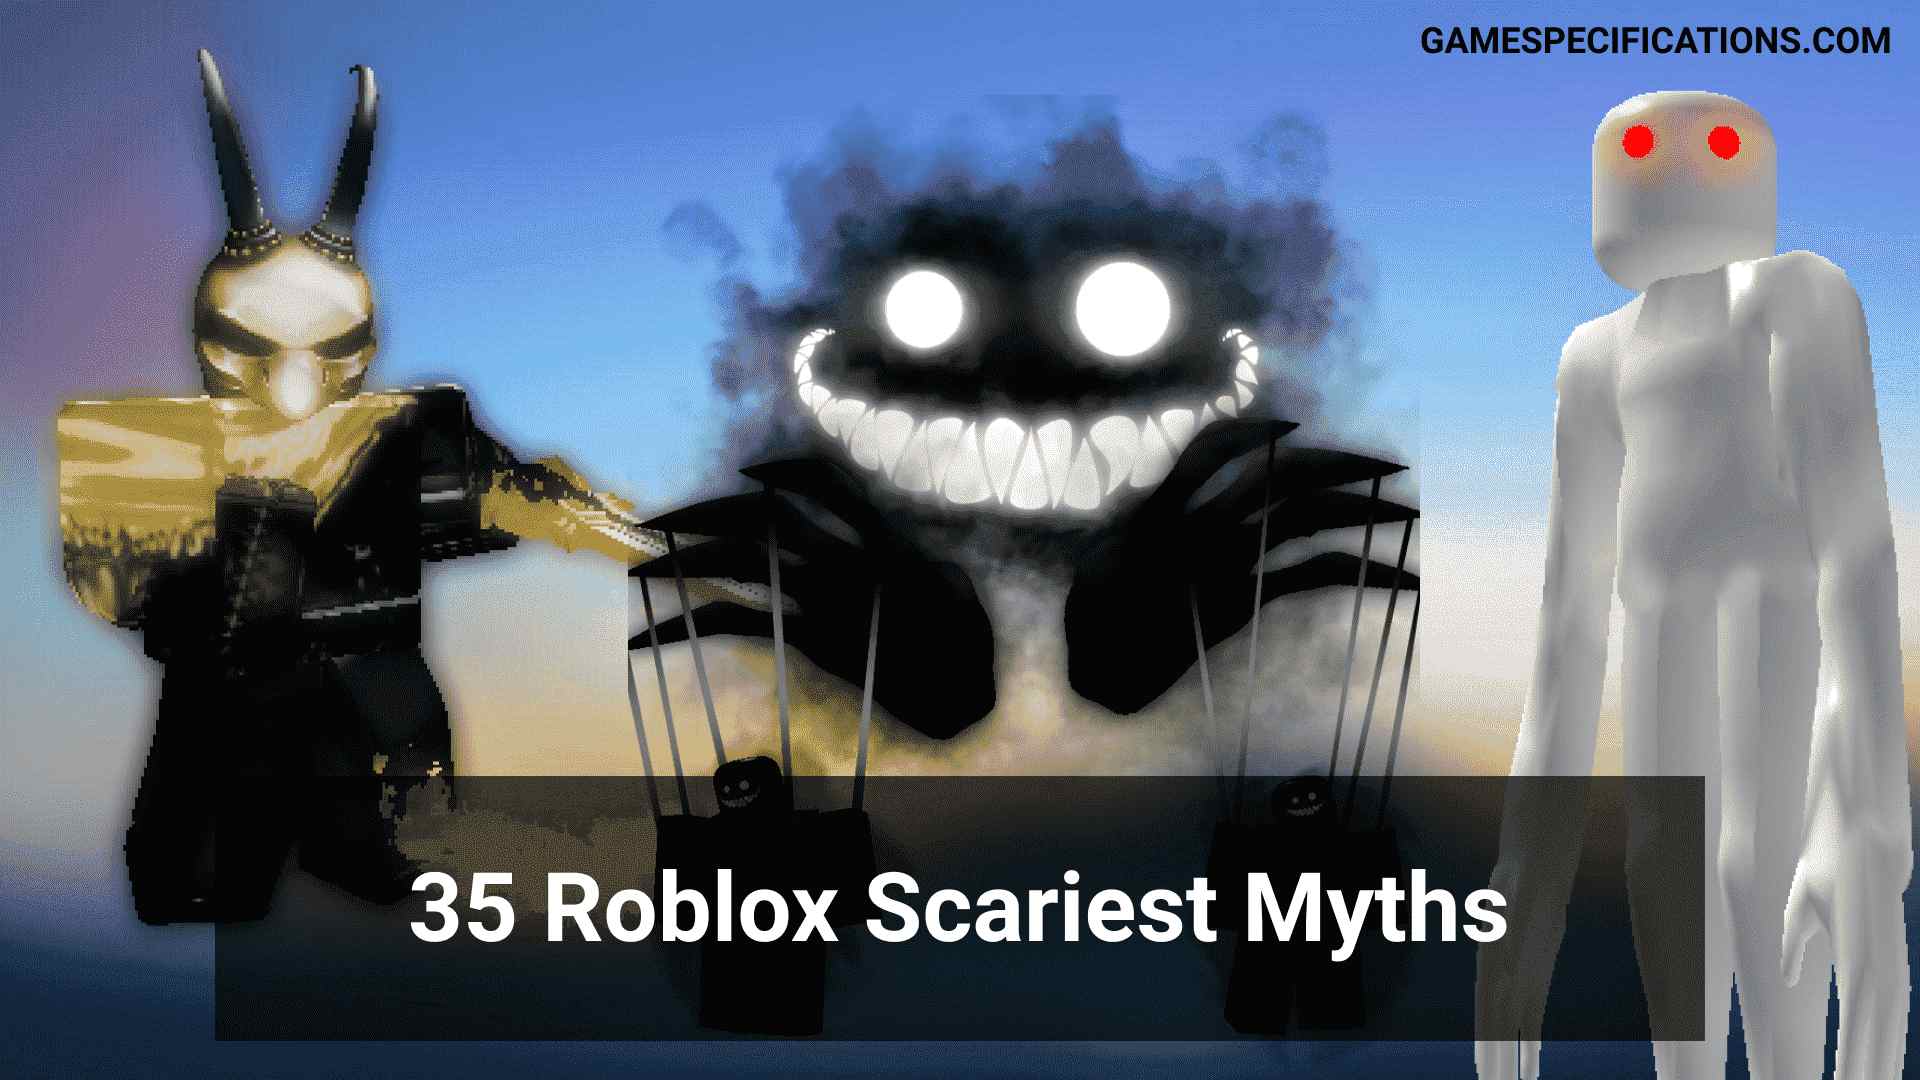 Roblox Myths A Scary Universe Of Roblox Game Specifications - goldity roblox account